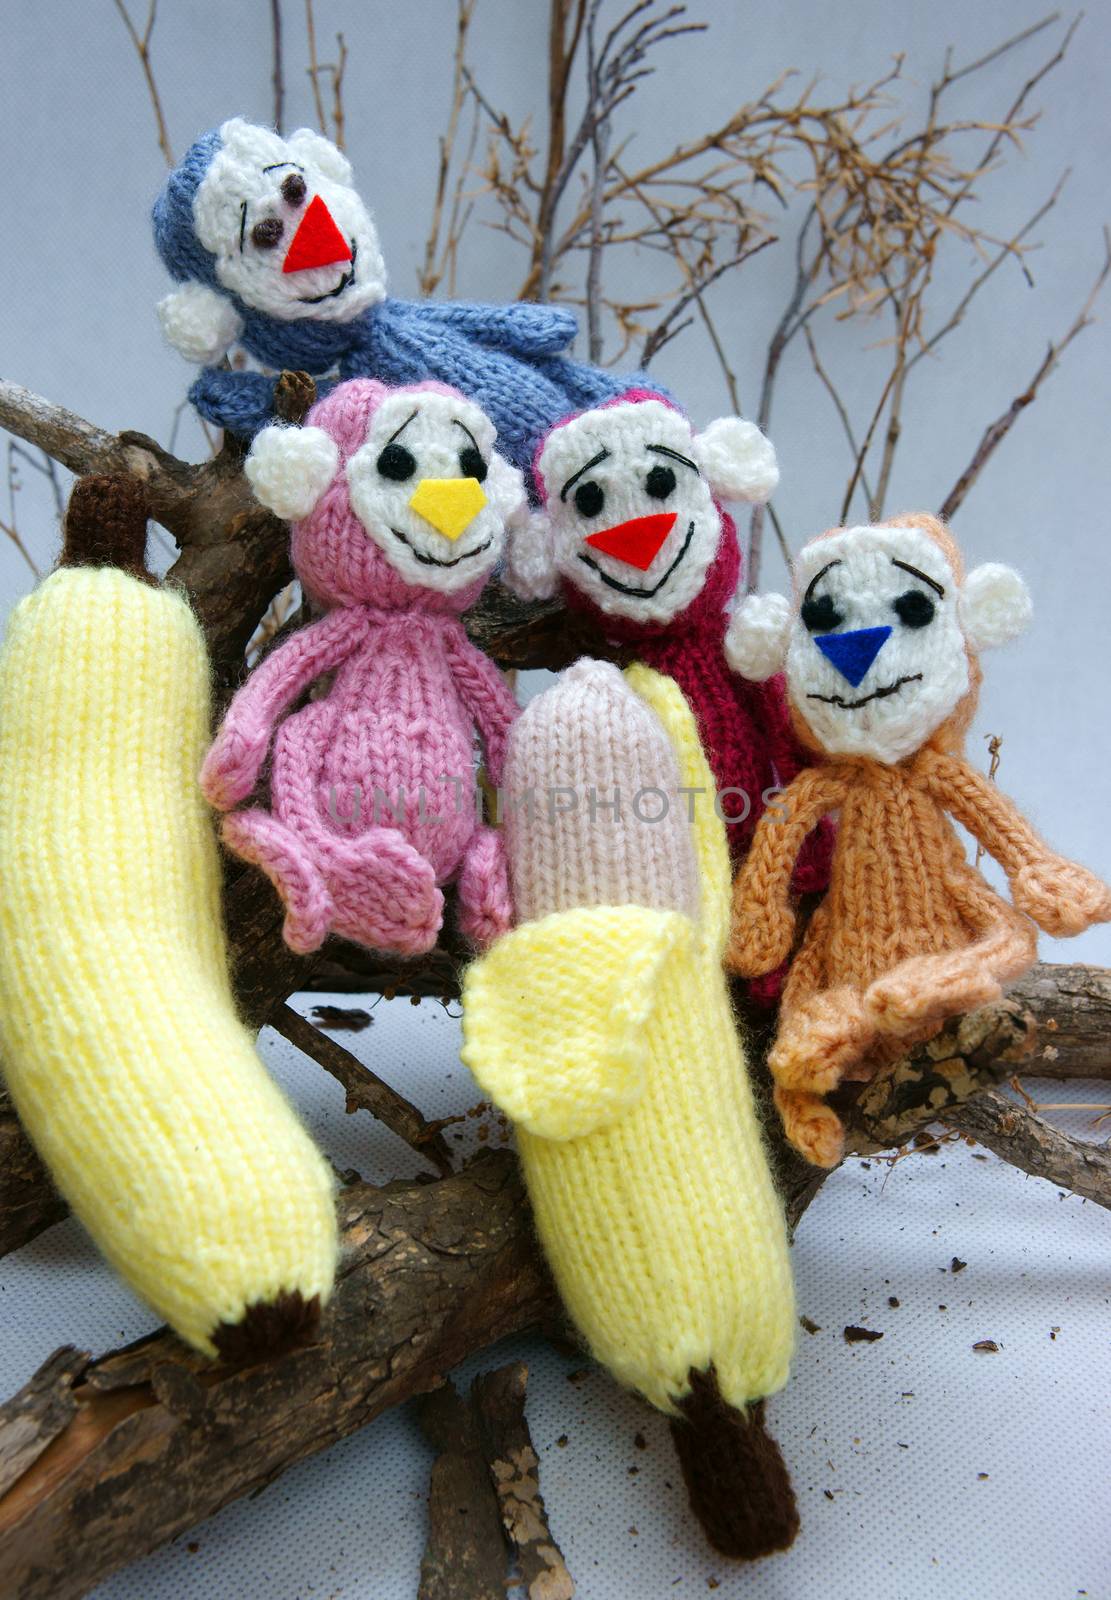 year of monkey, knitted toy, symbol, handmade by xuanhuongho